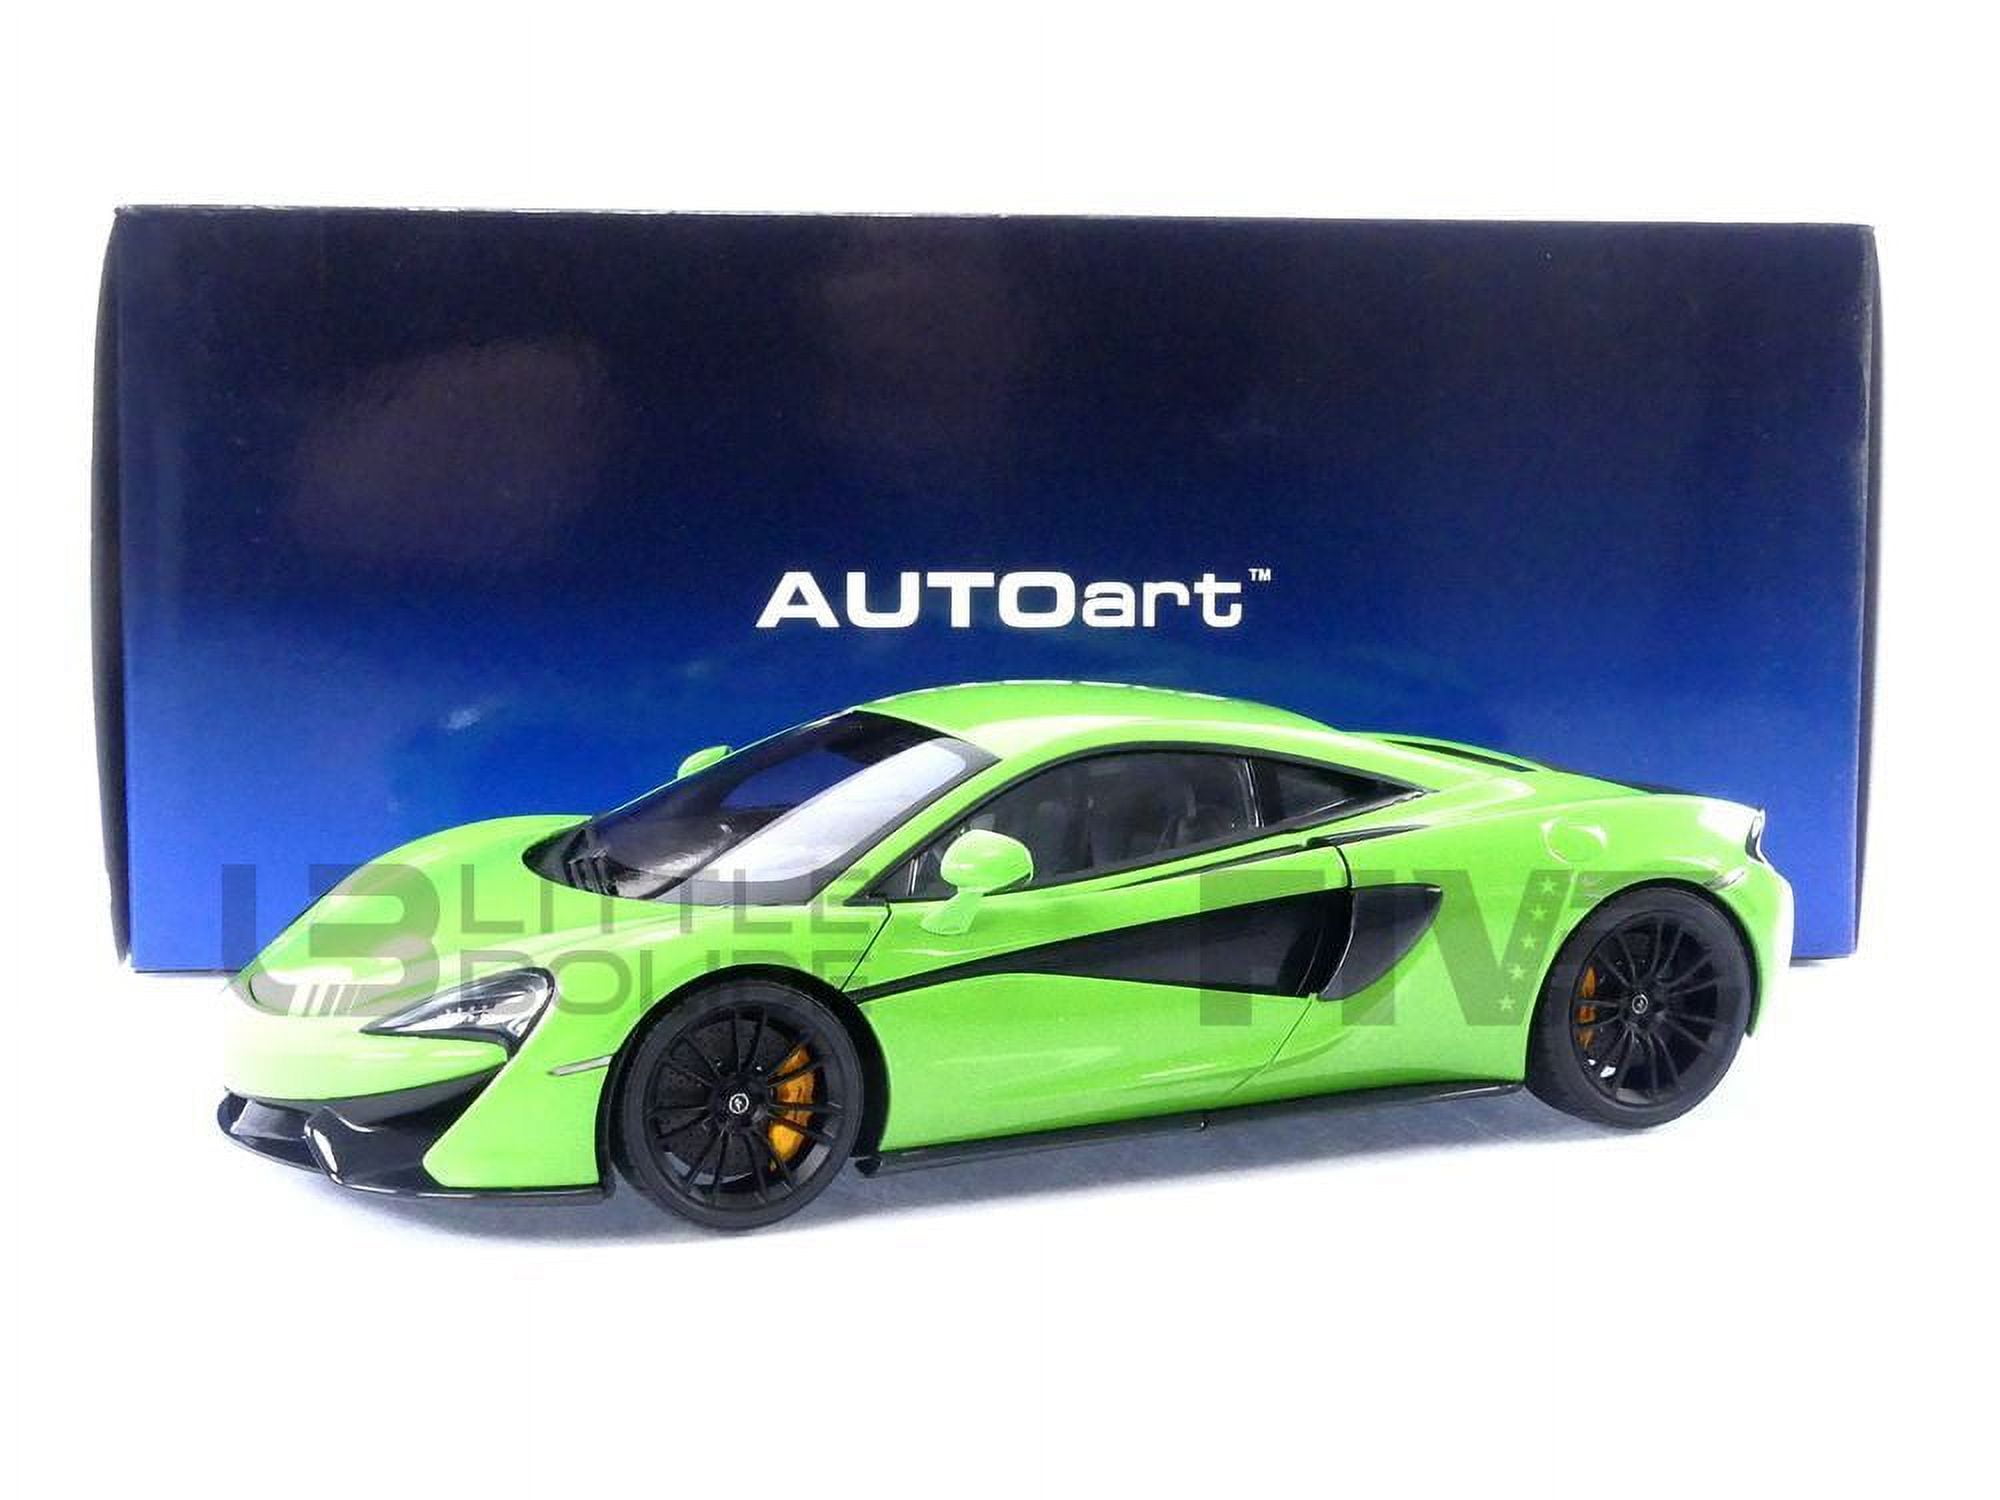 Picture of Autoart 76042 Mclaren 570S Mantis Green with Black Wheels 1-18 Scale Model Car